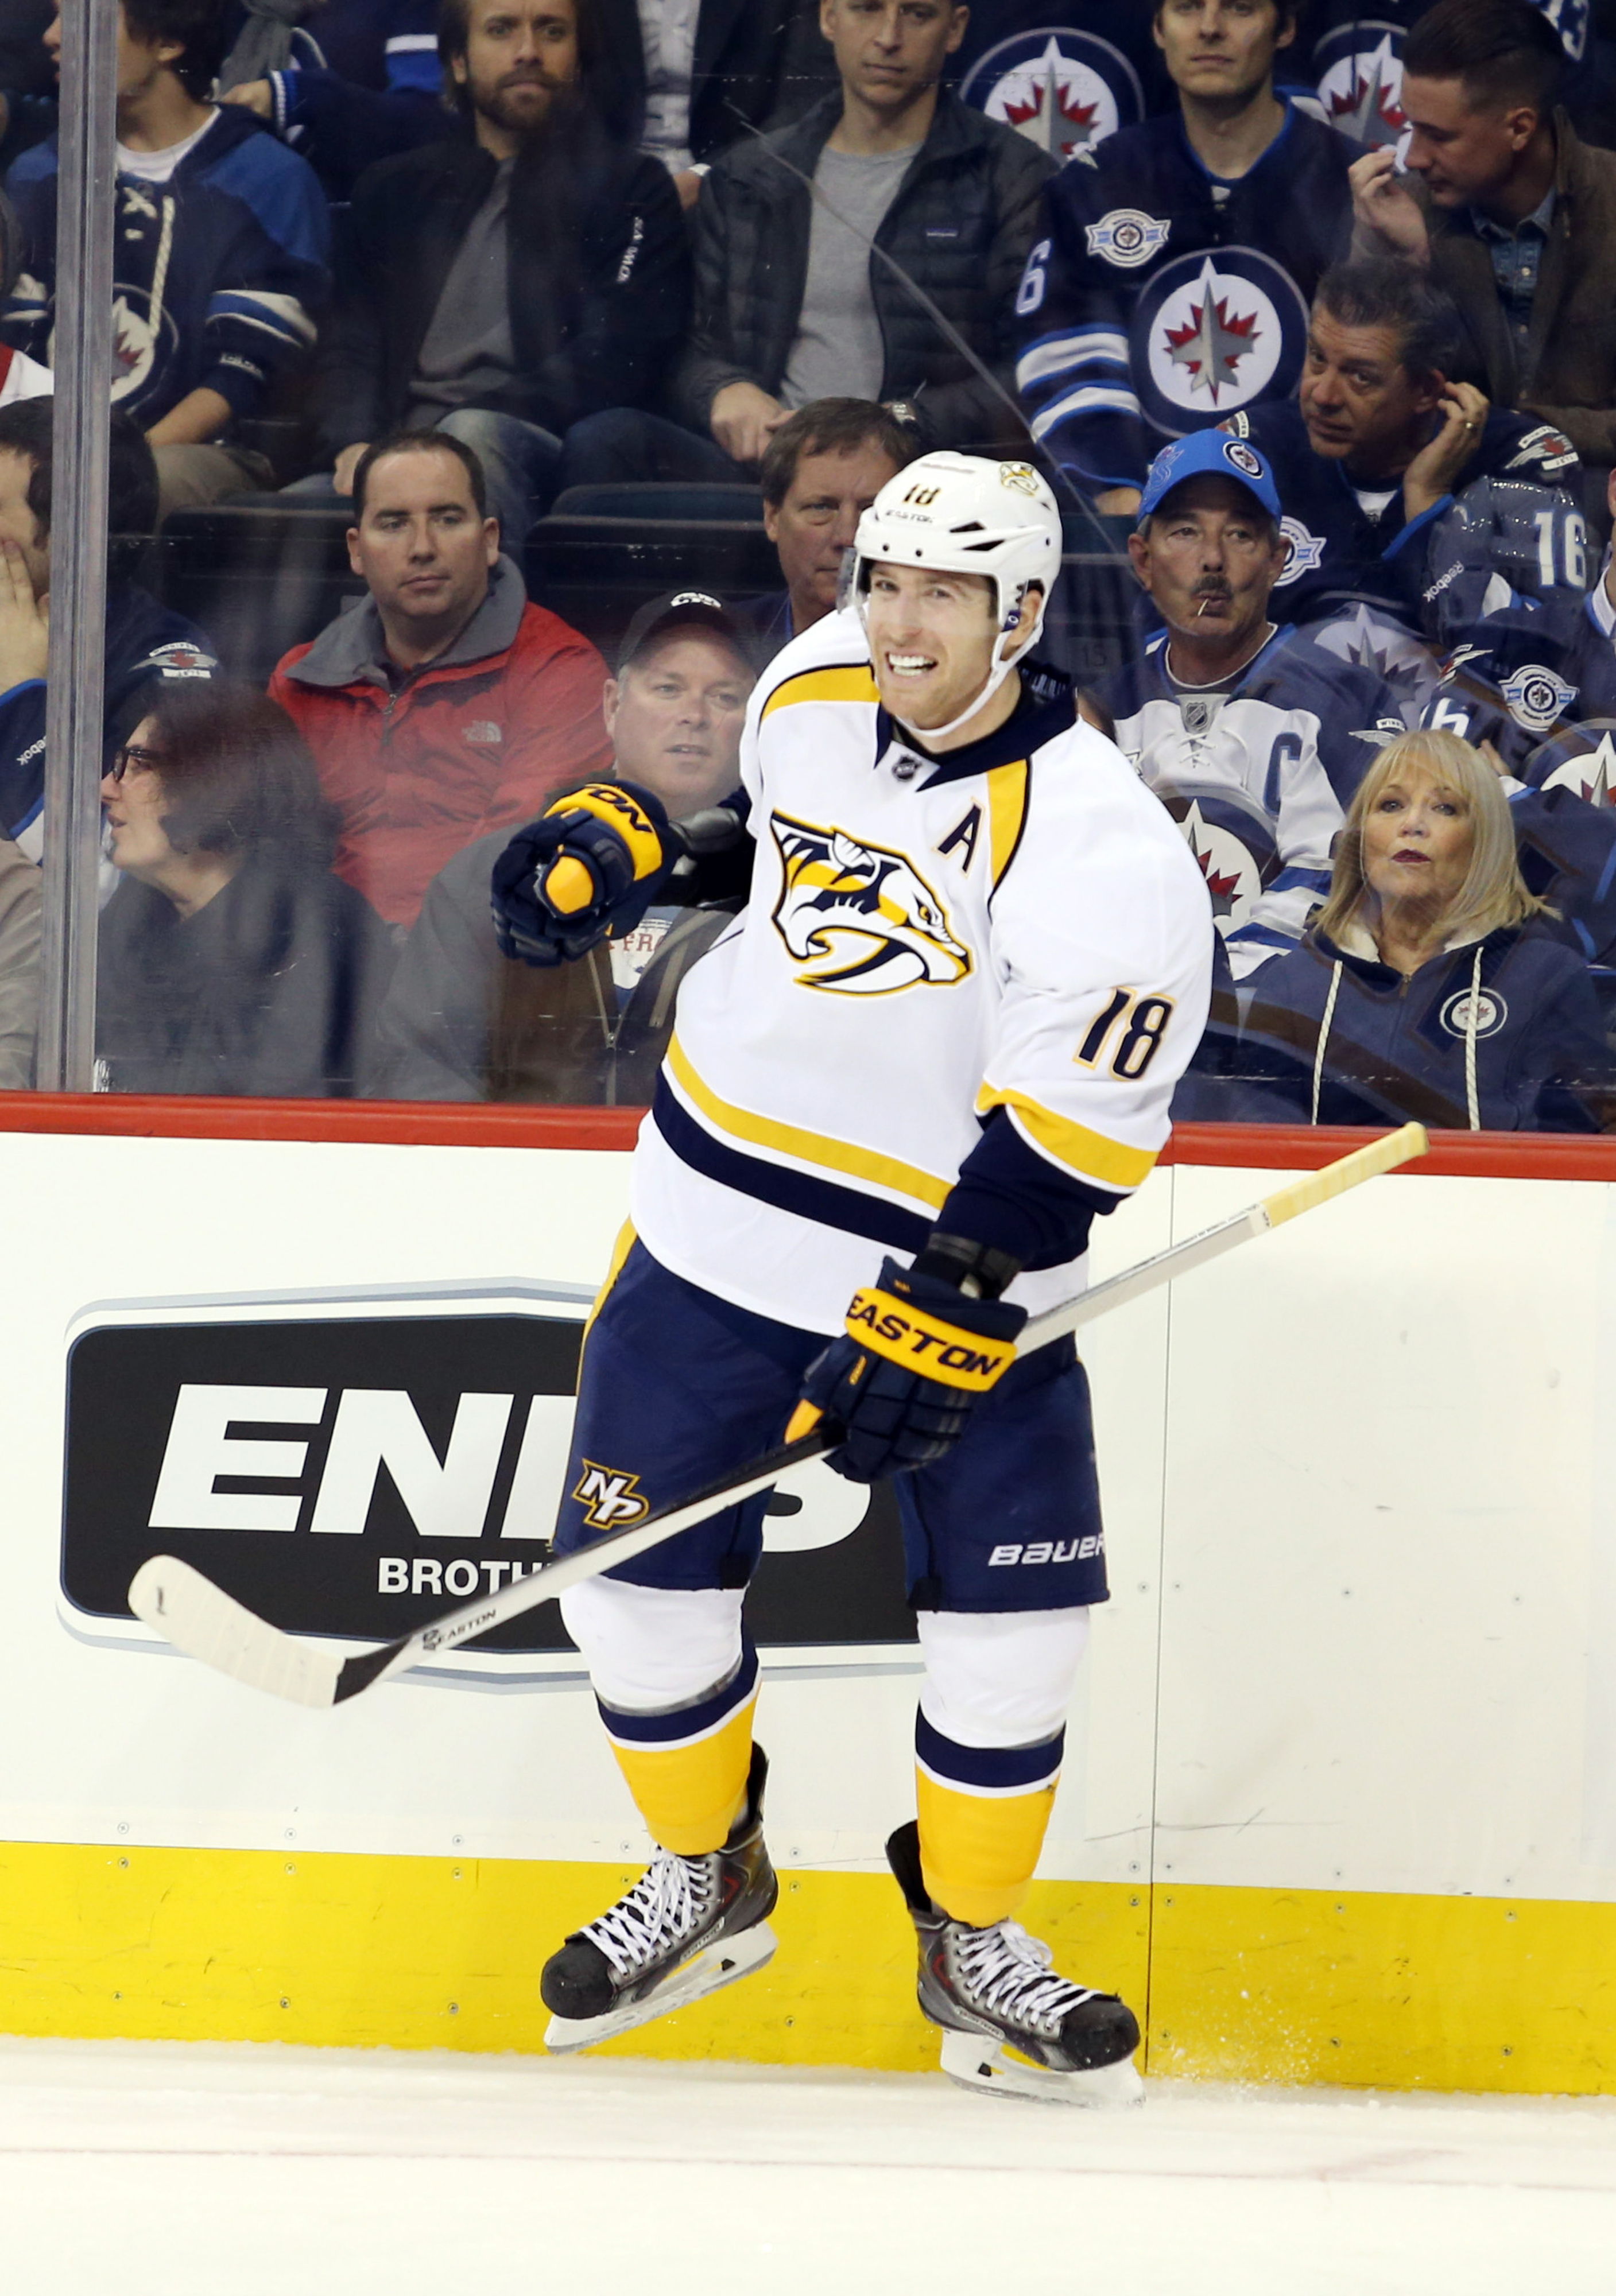 Winnipeg, Manitoba, CAN--Nashville Predators forward James Neal celebrates his goal during the third period against Winnipeg Jets at the MTS Centre on October 17, 2014. Nashville wins 2-0. Mandatory Credit: Bruce Fedyck-USA TODAY Sports